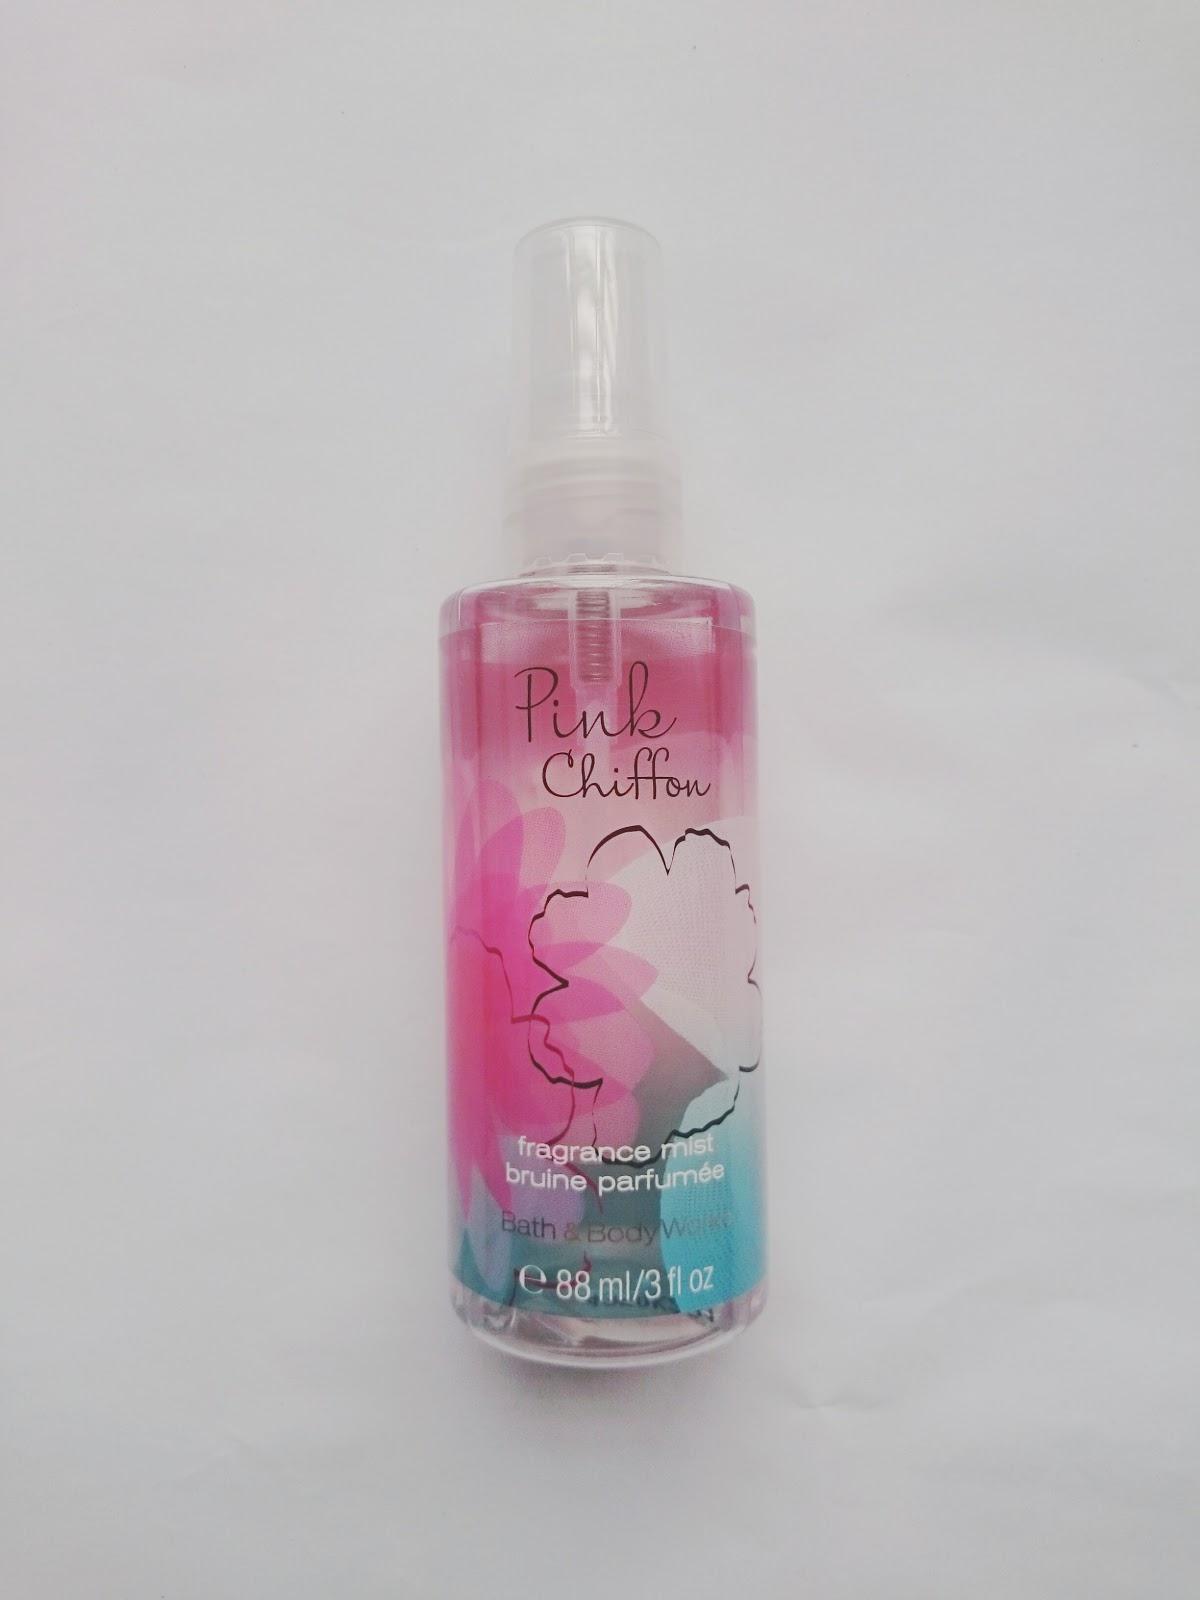 Bath and Body Works Fragrance Mist in Pink Chiffon | Beauty Review ...